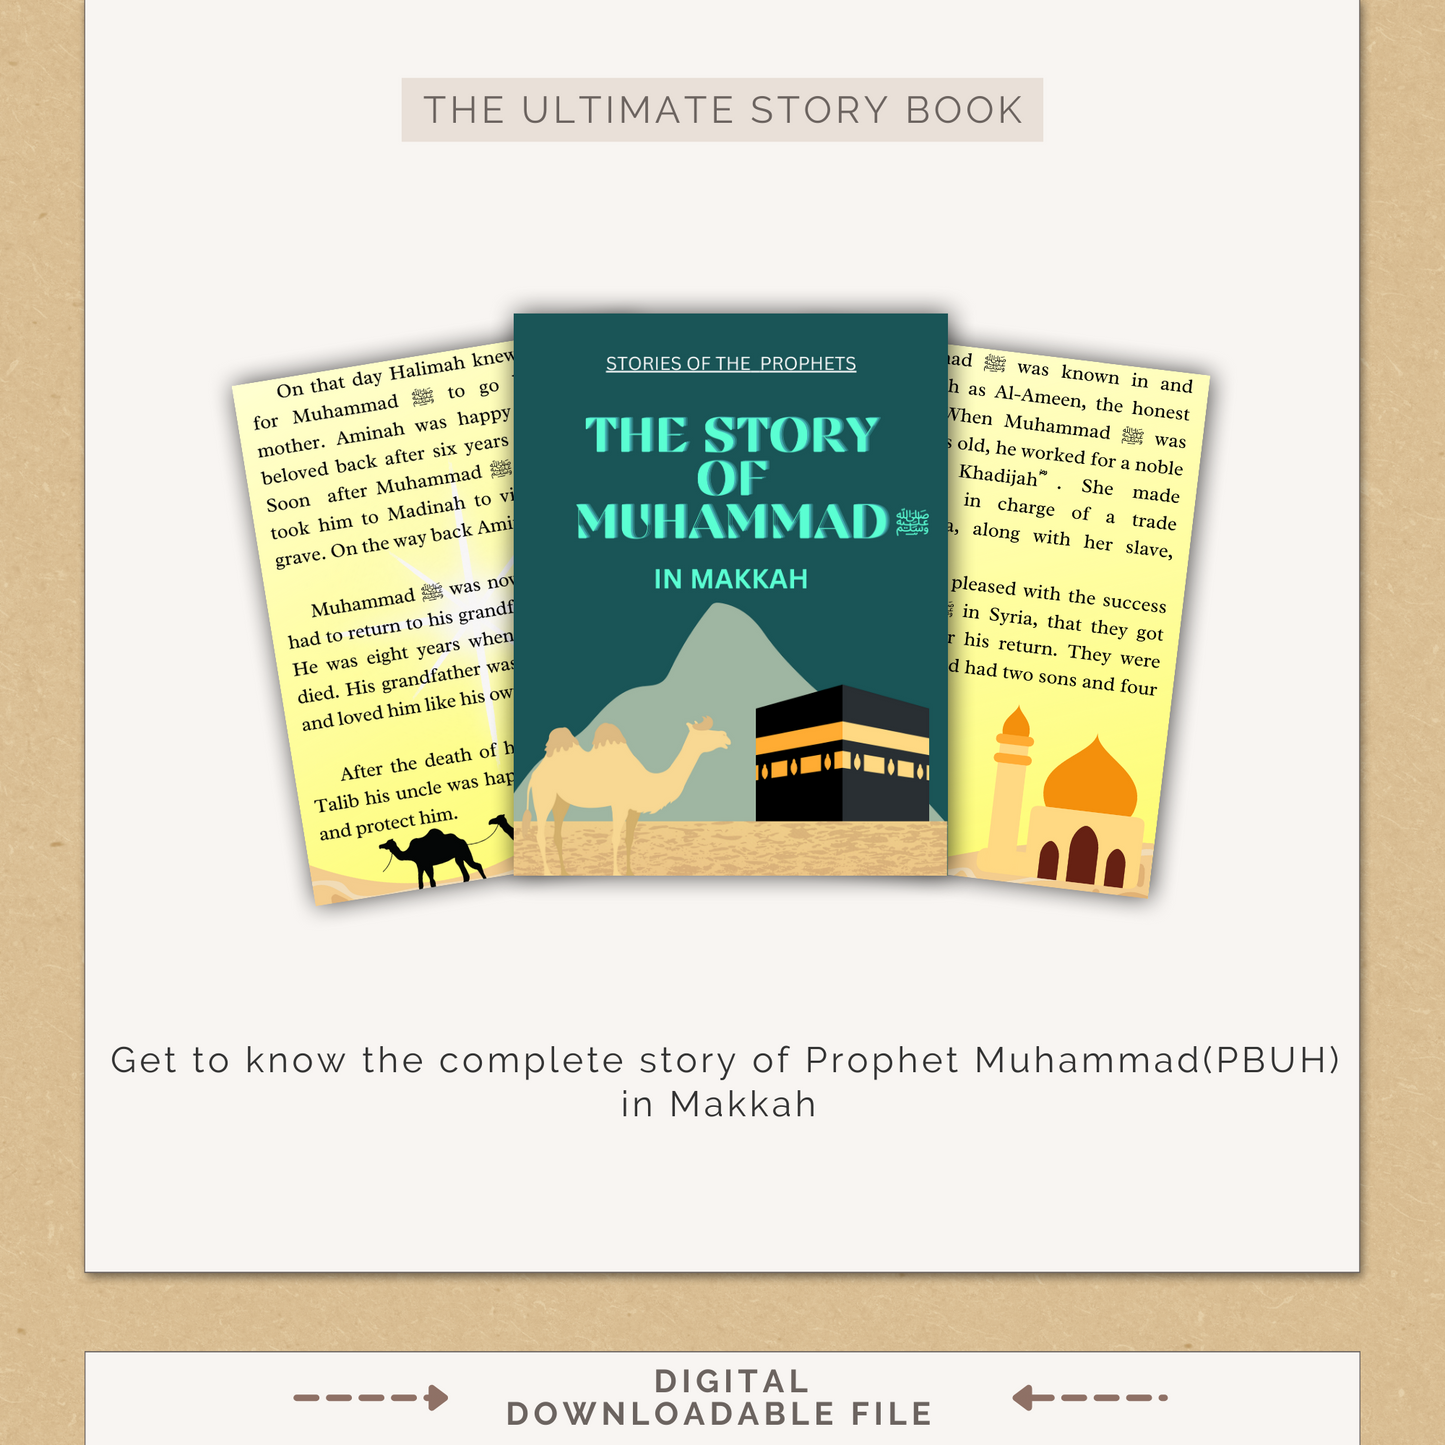 Muhammad (PBUH) in Makkah: A Journey of Faith and Perseverance